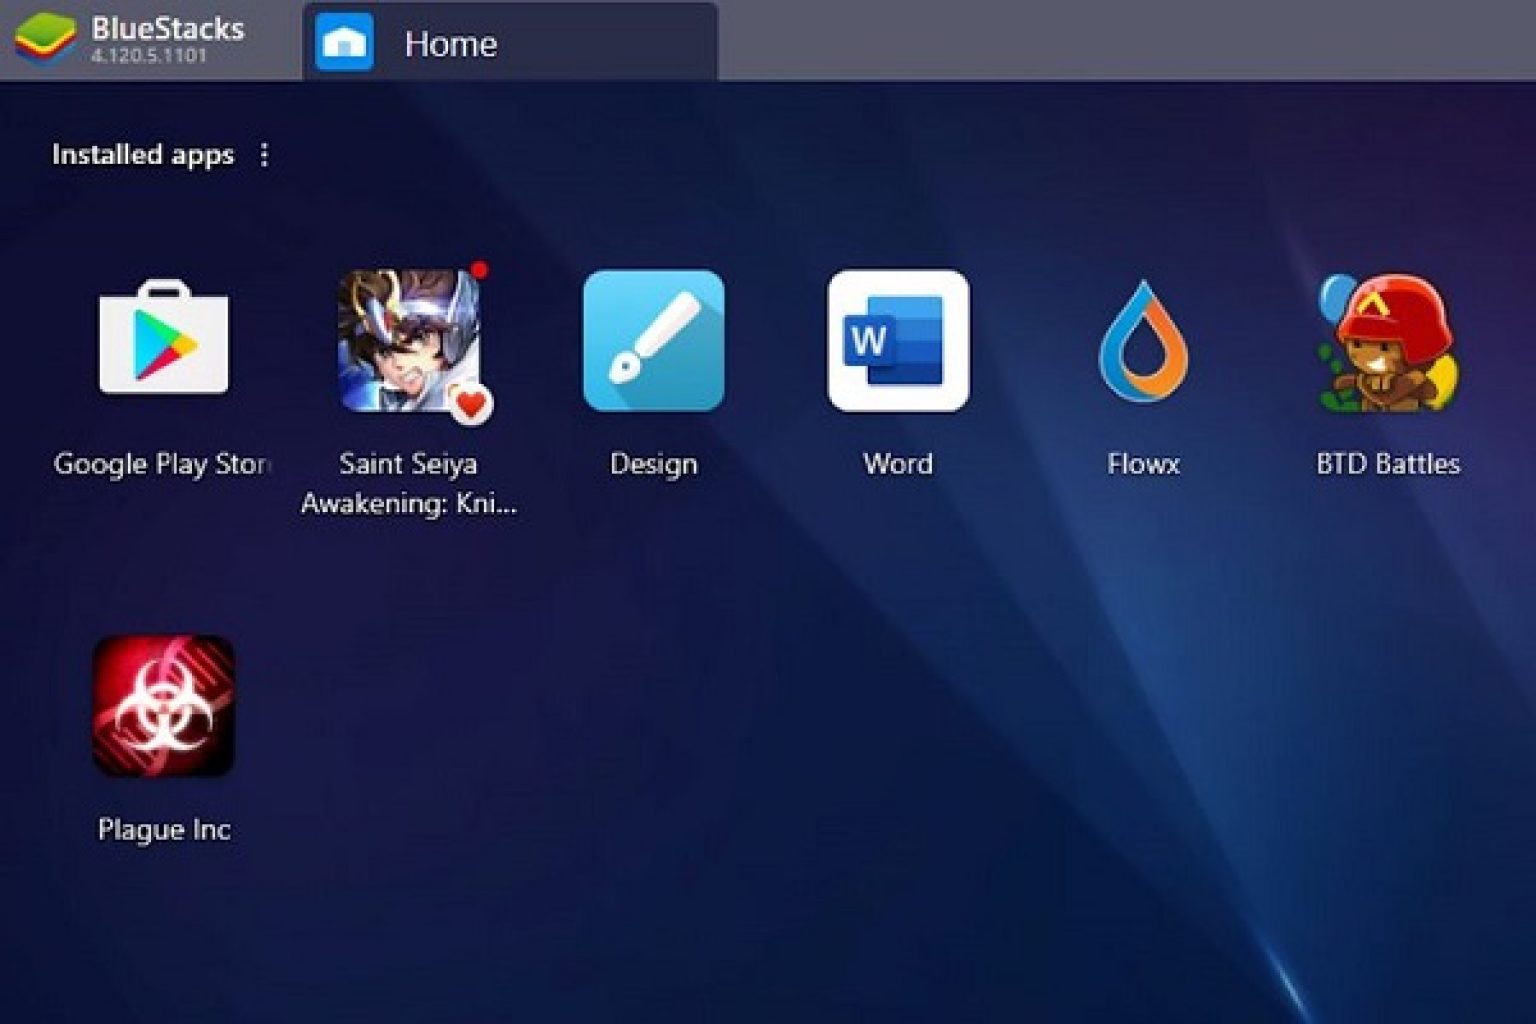 how to update bluestacks to latest android version